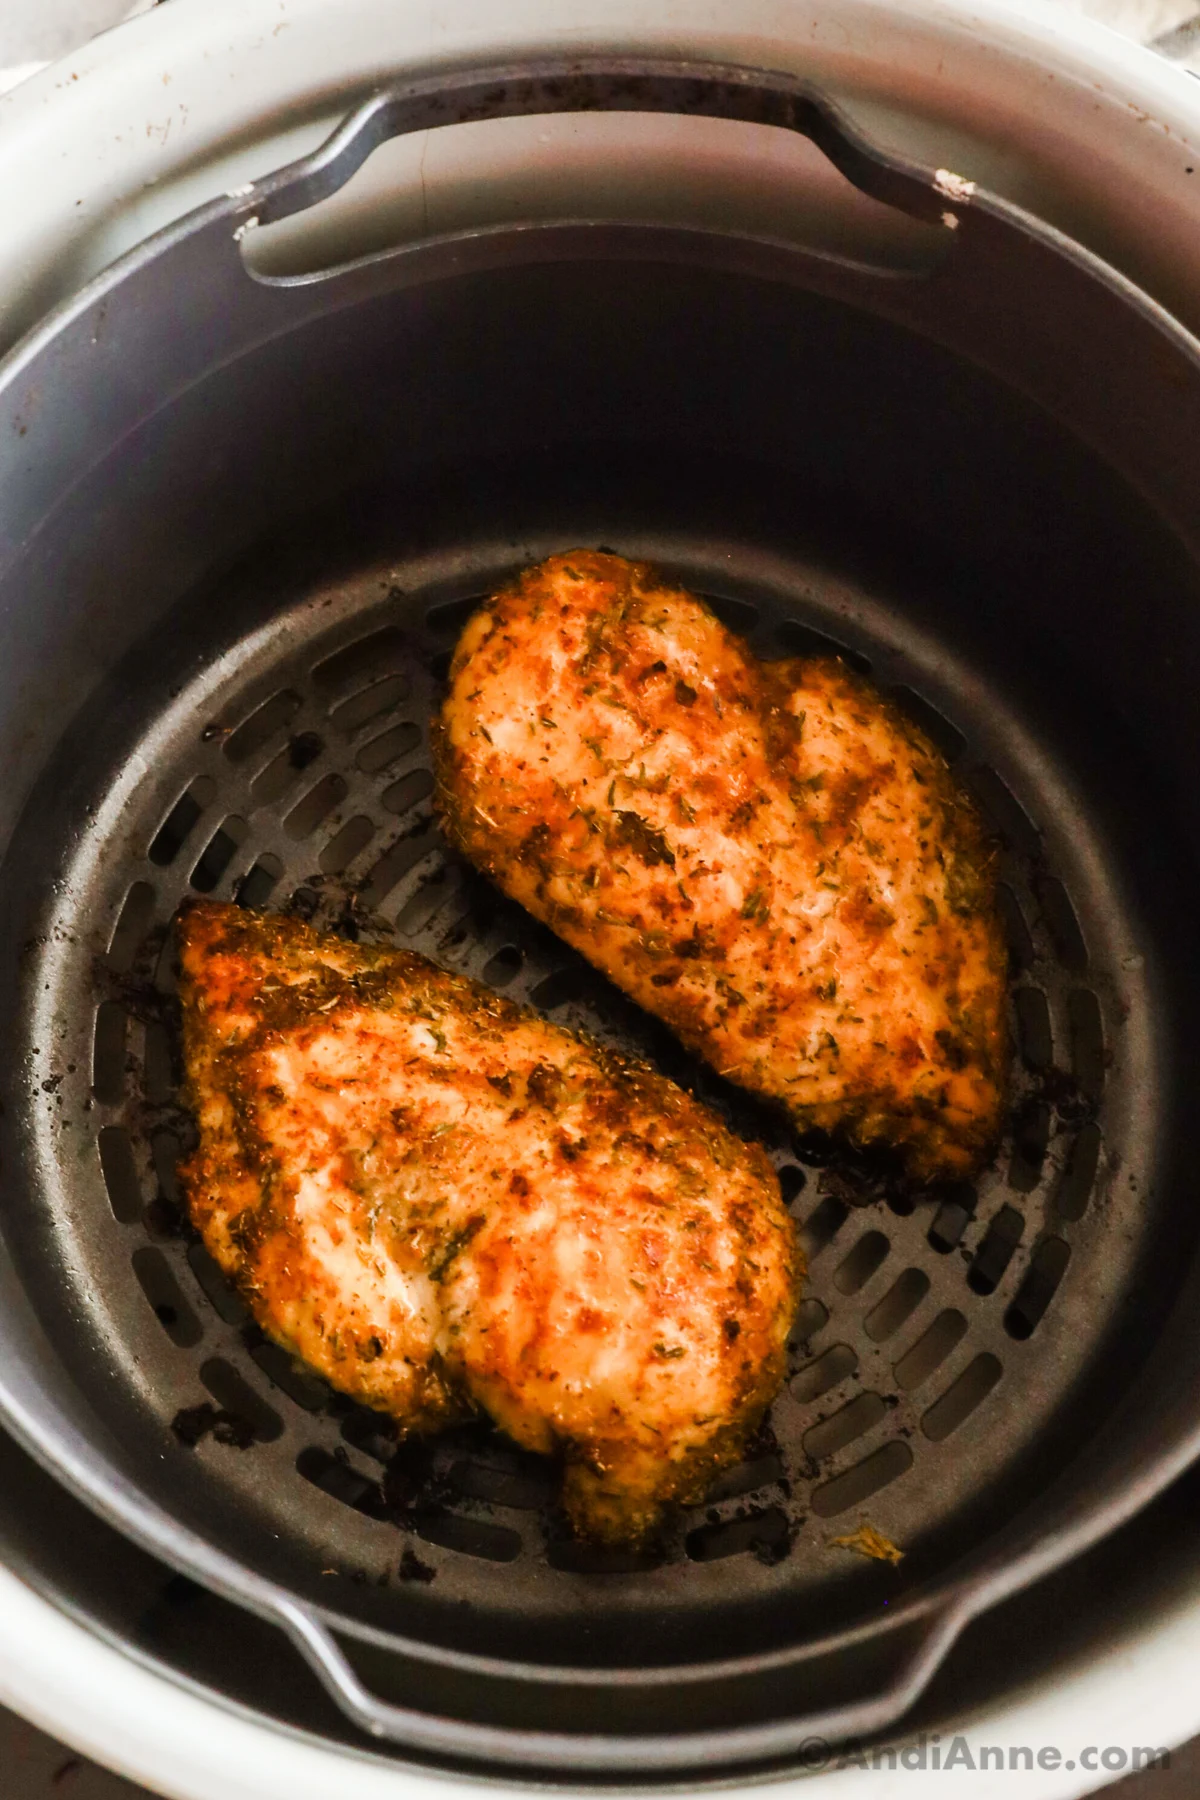 Looking into an air fryer with two cooked chicken breasts.